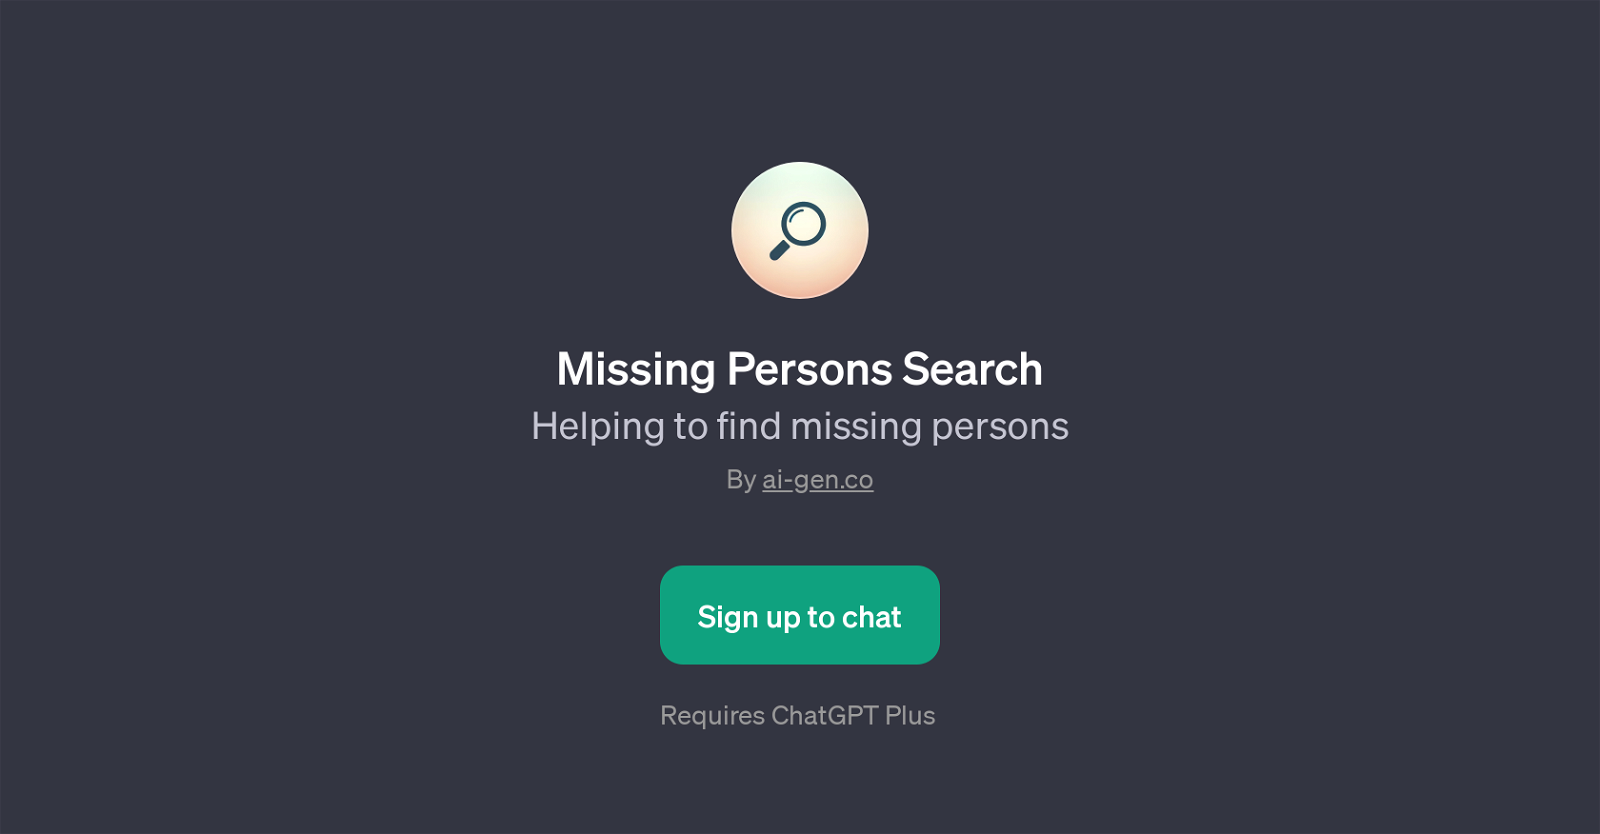 Missing Persons Search website